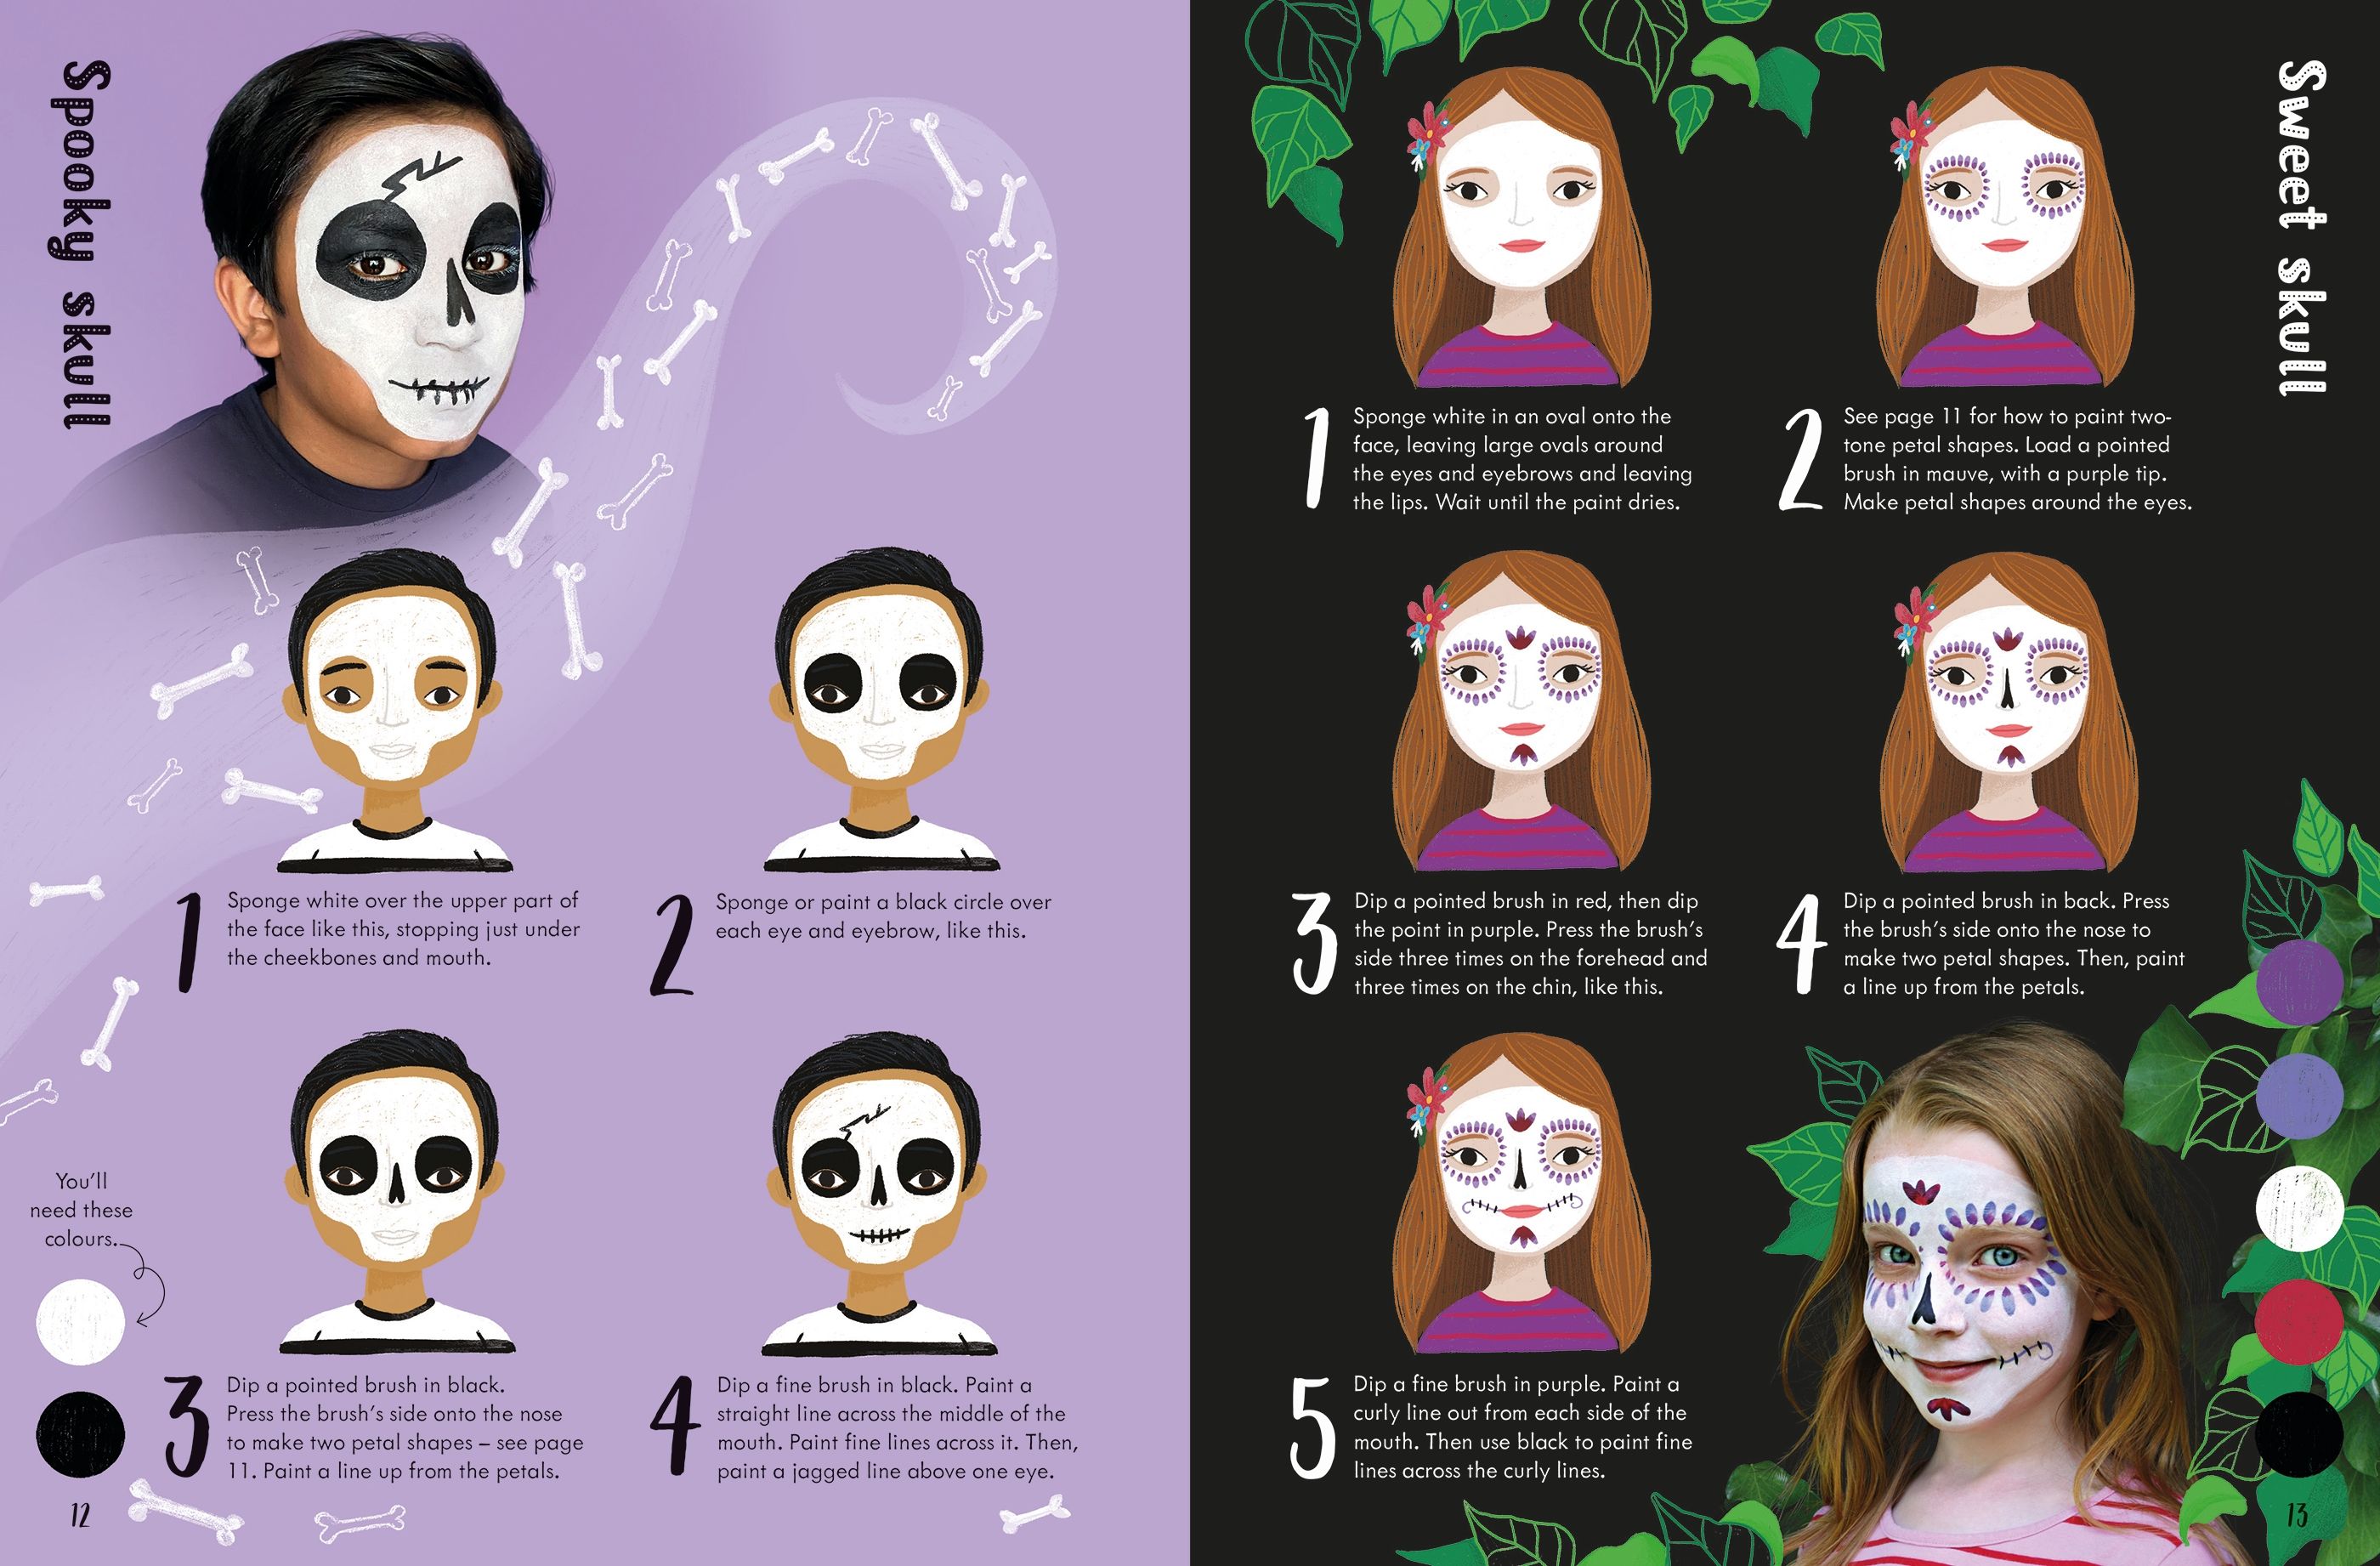 The Usborne Book of Face Painting